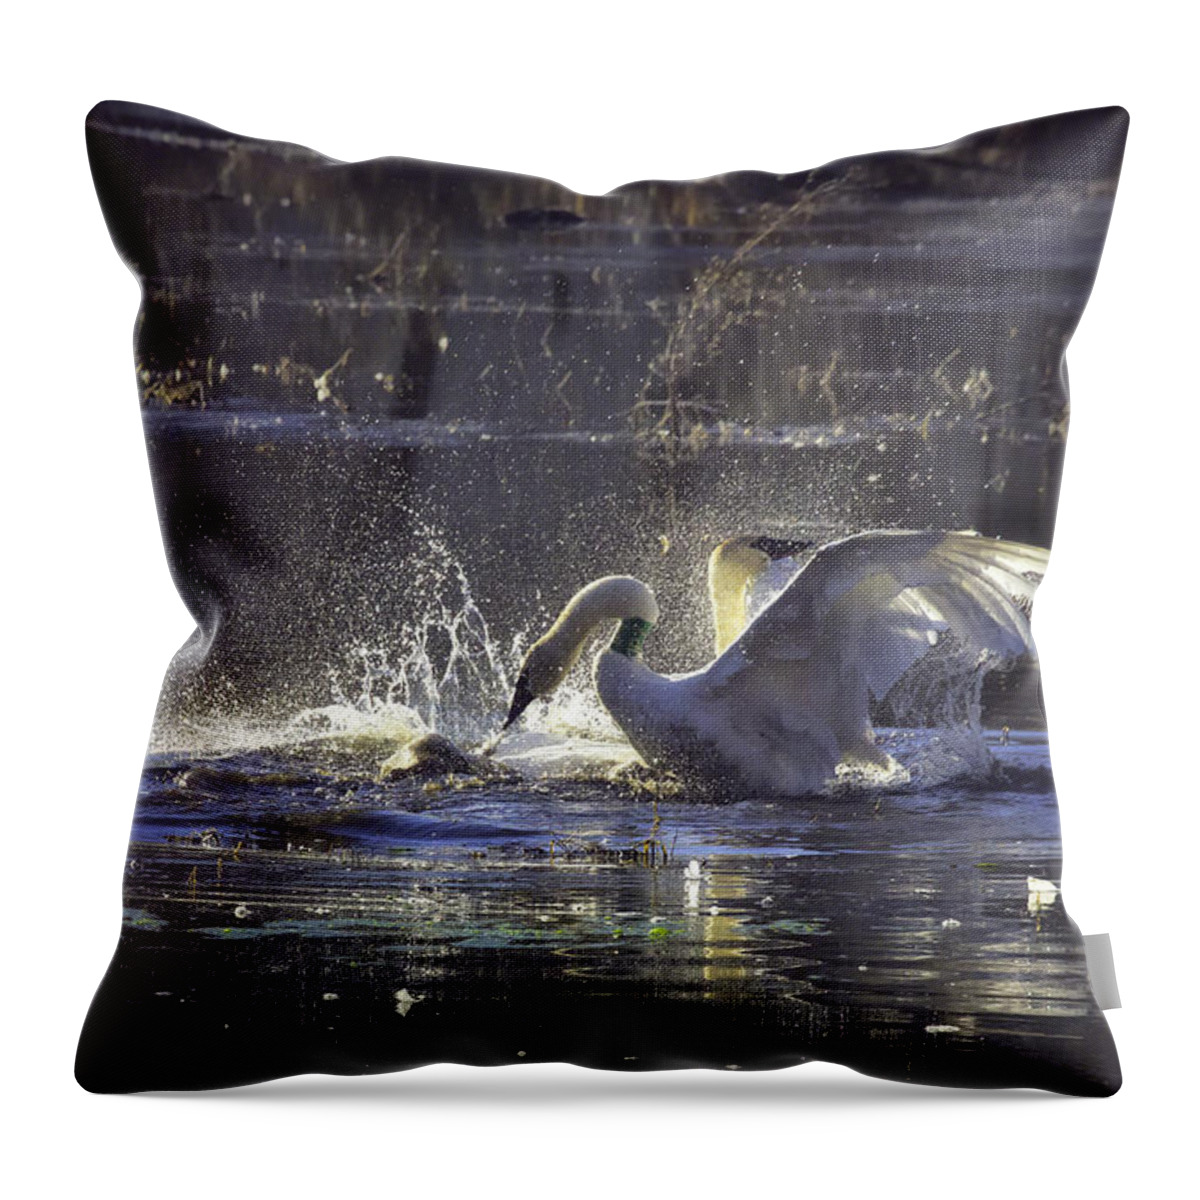 Trumpeter Swans Throw Pillow featuring the photograph Fighting Swans Boxley Mill Pond by Michael Dougherty